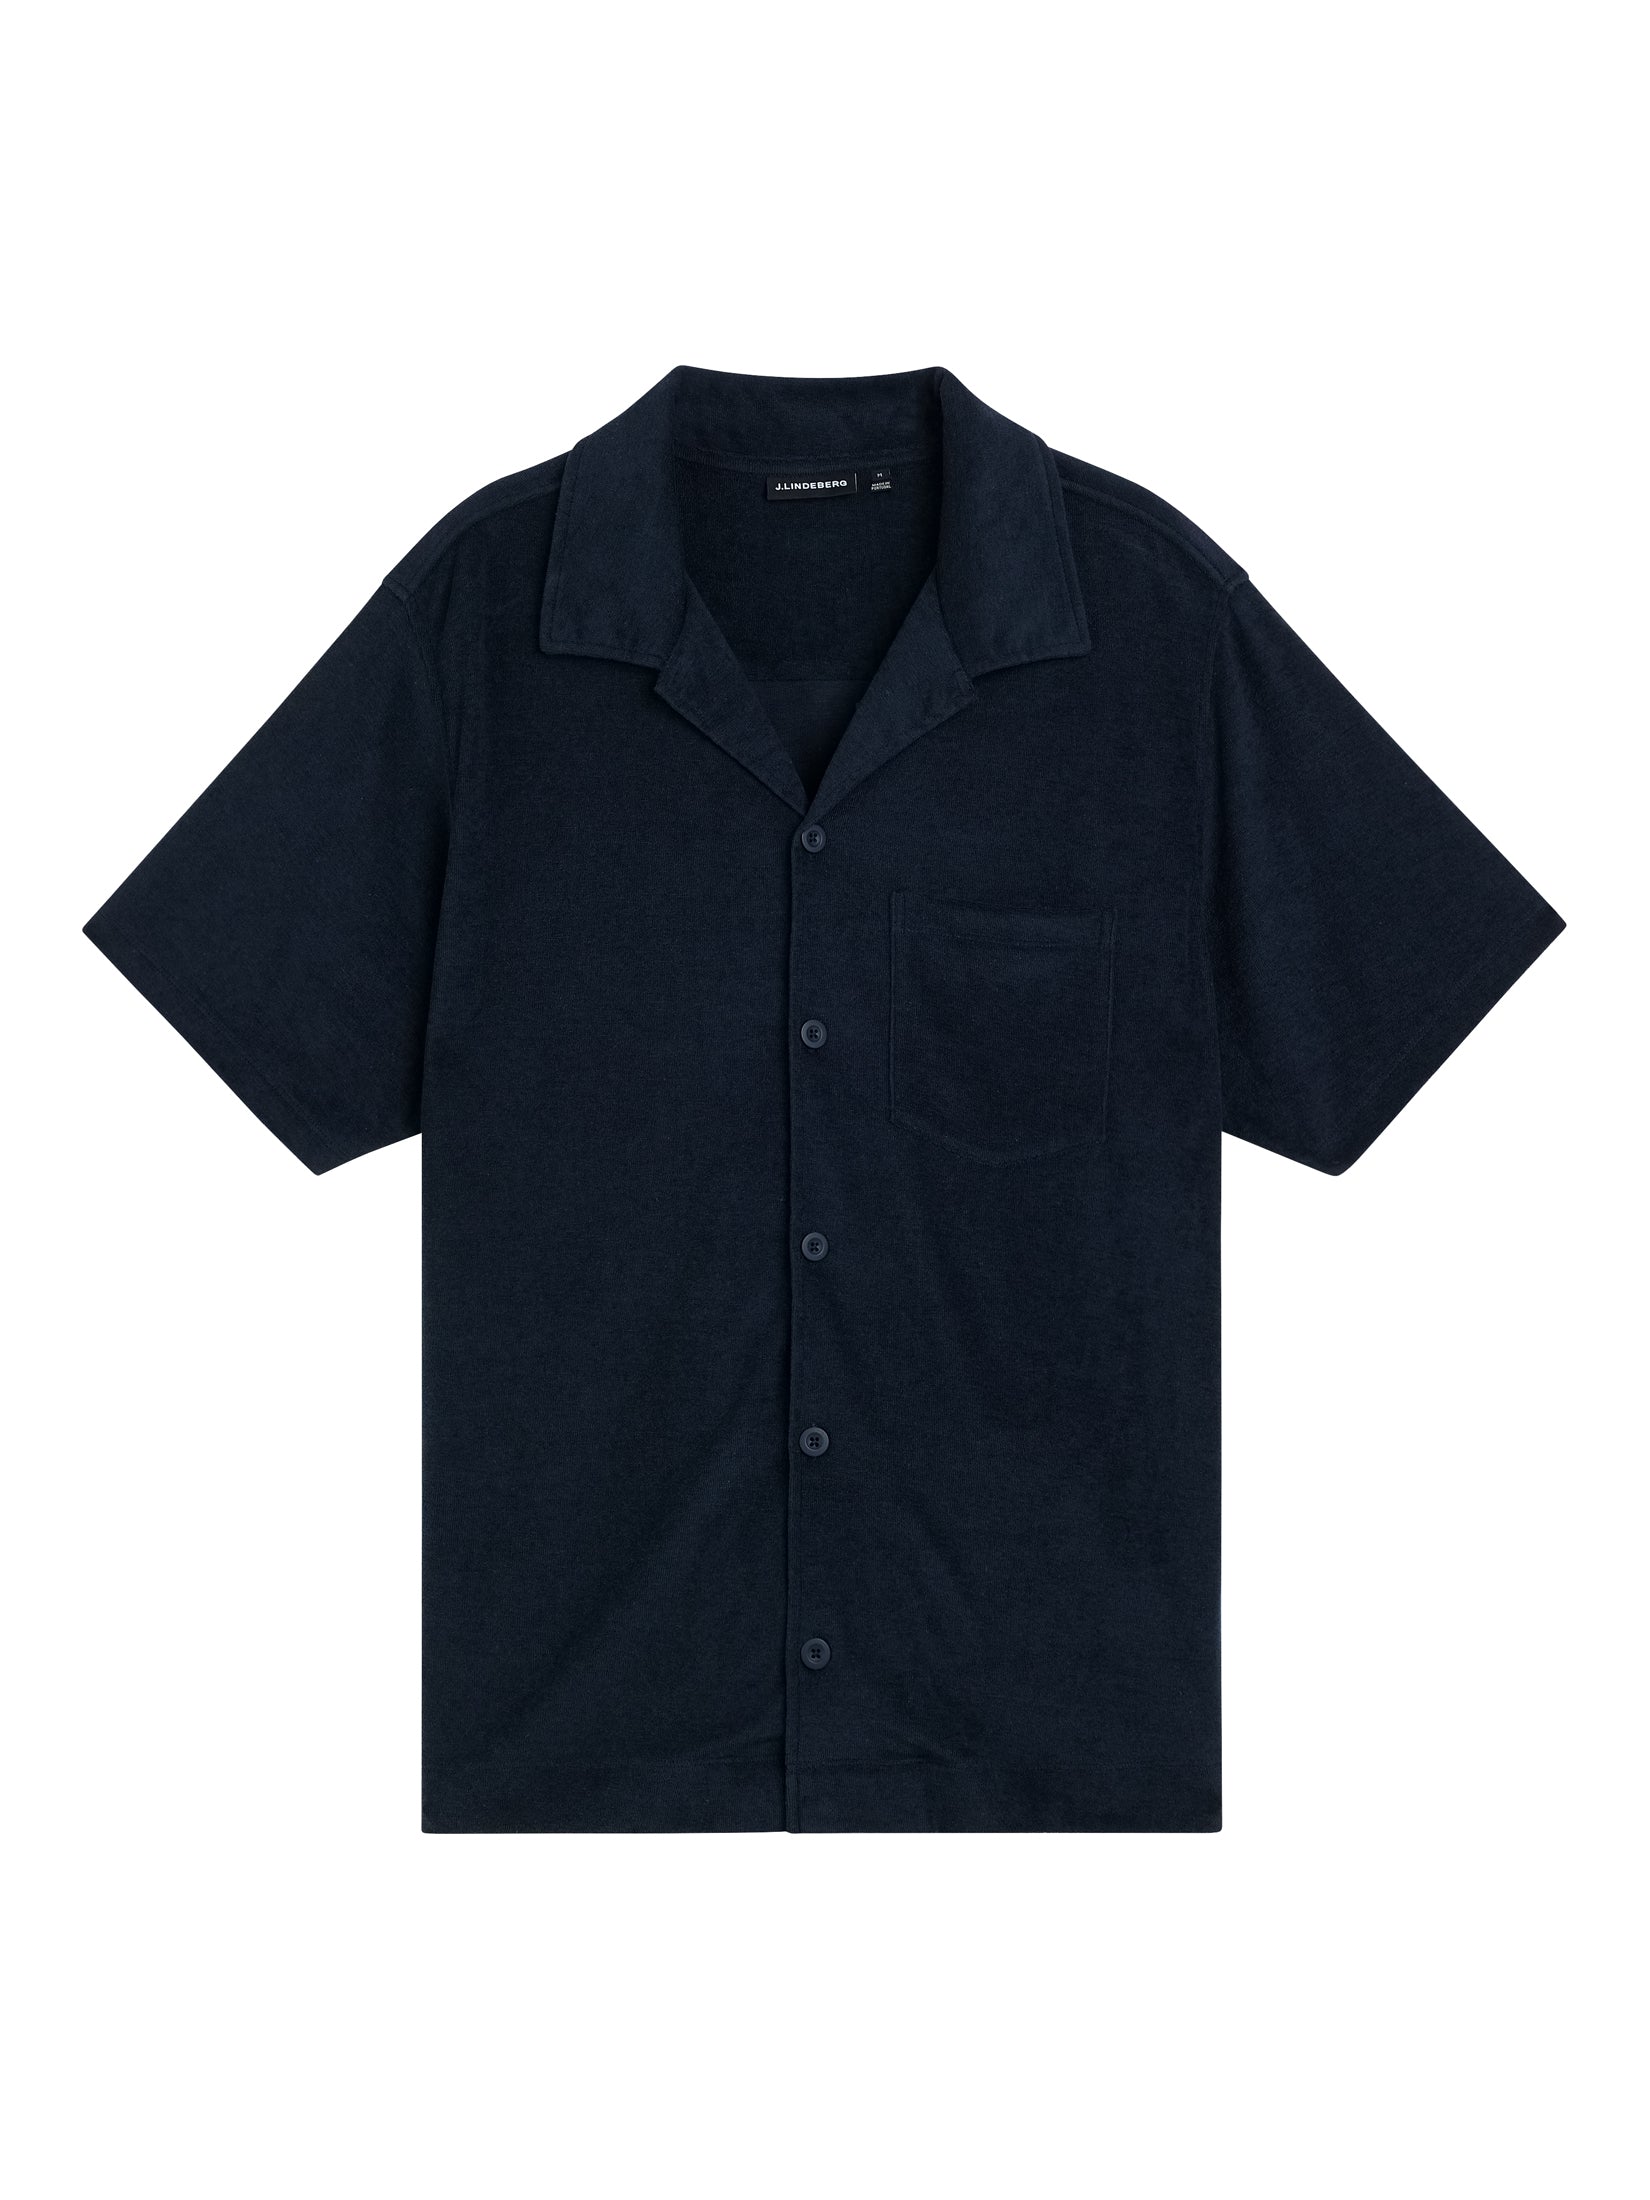 Ted Terry Resort Shirt